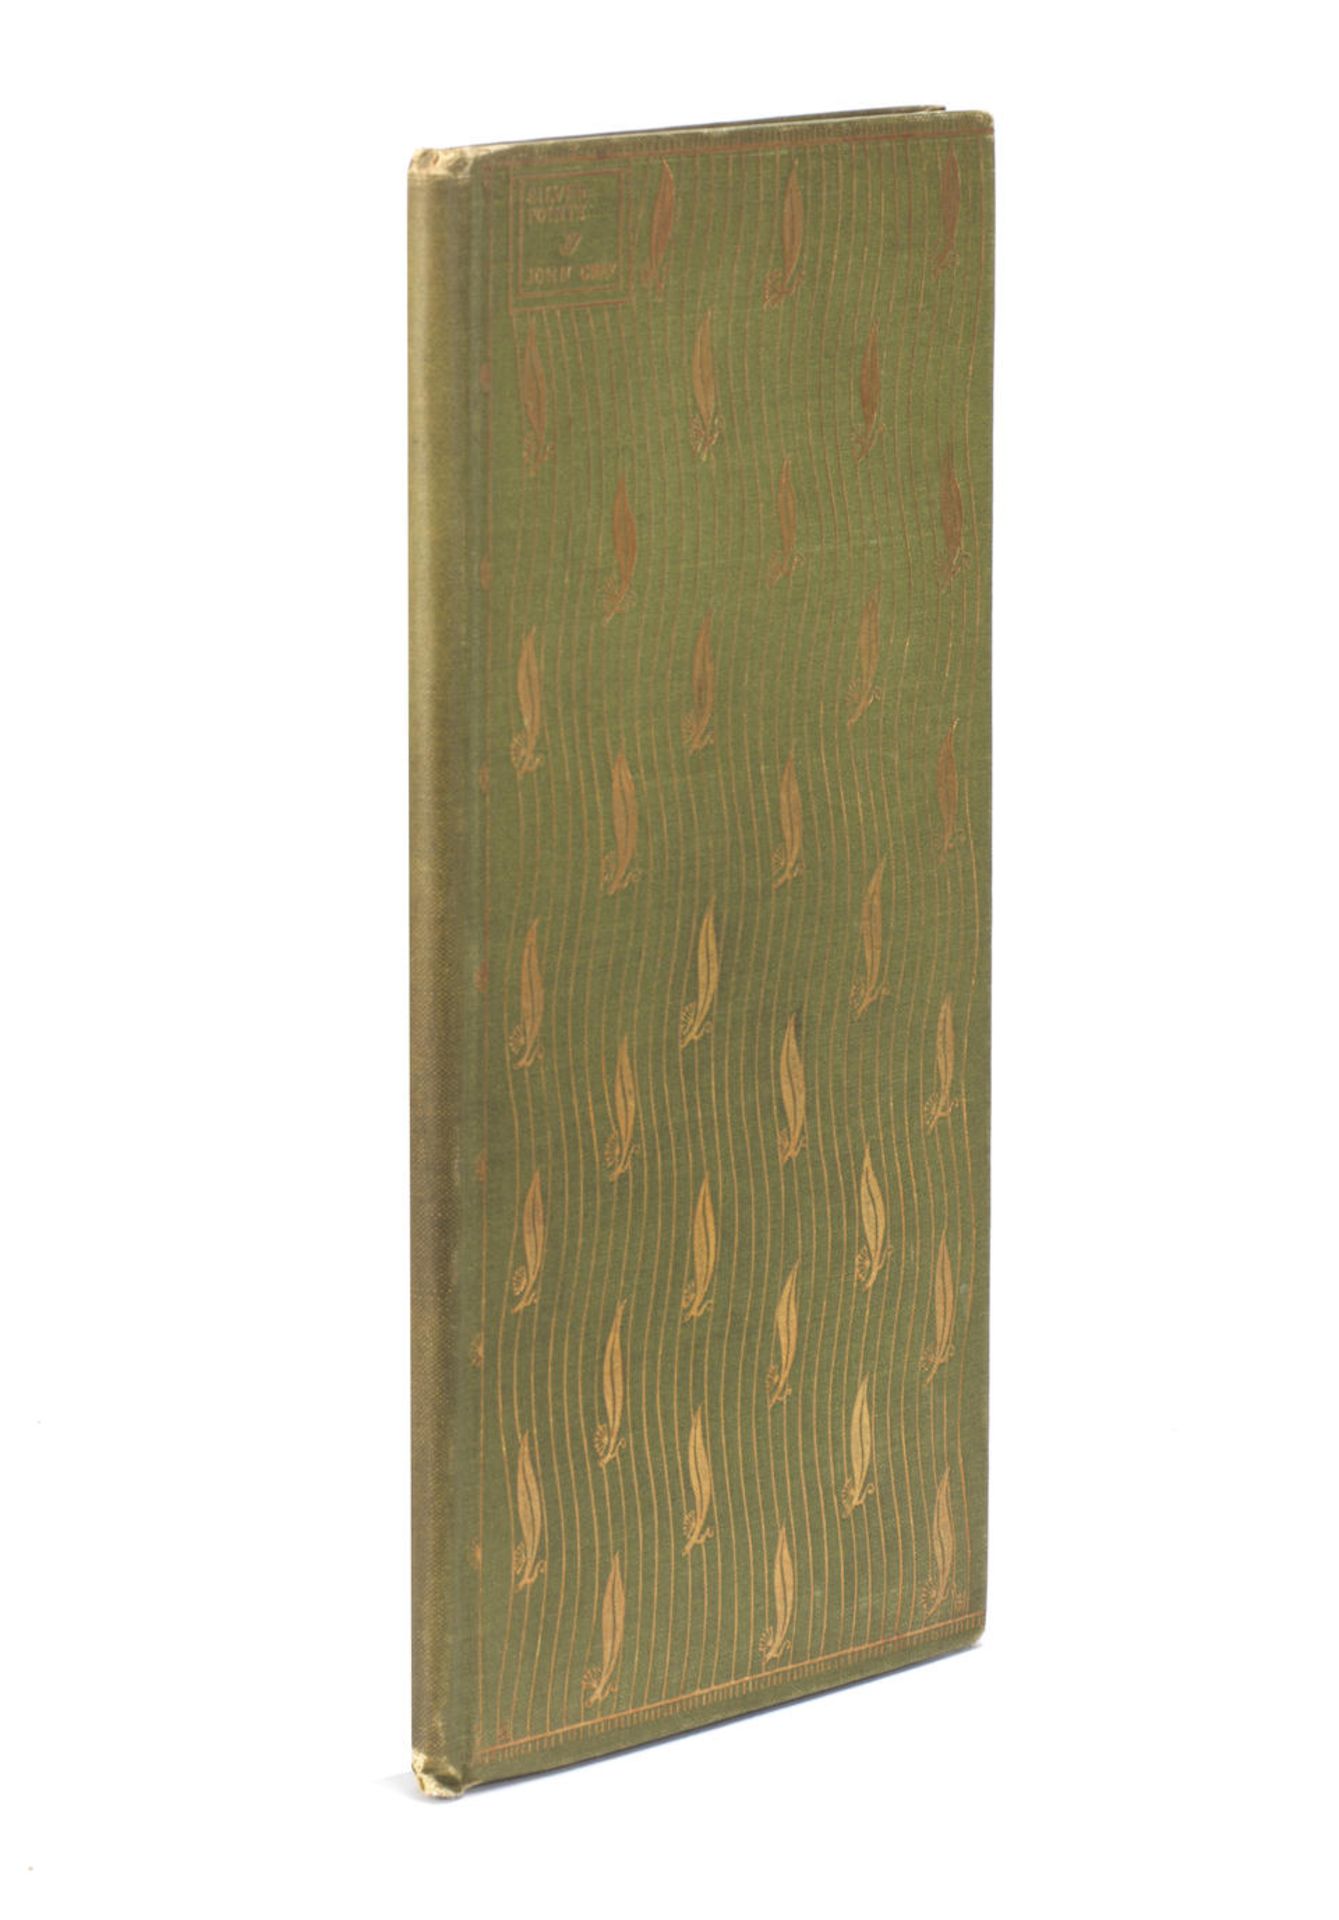 GRAY (JOHN) Silverpoints, FIRST EDITION, NUMBER 43 OF 250 COPIES, Elkin Matthews and John Lane ...